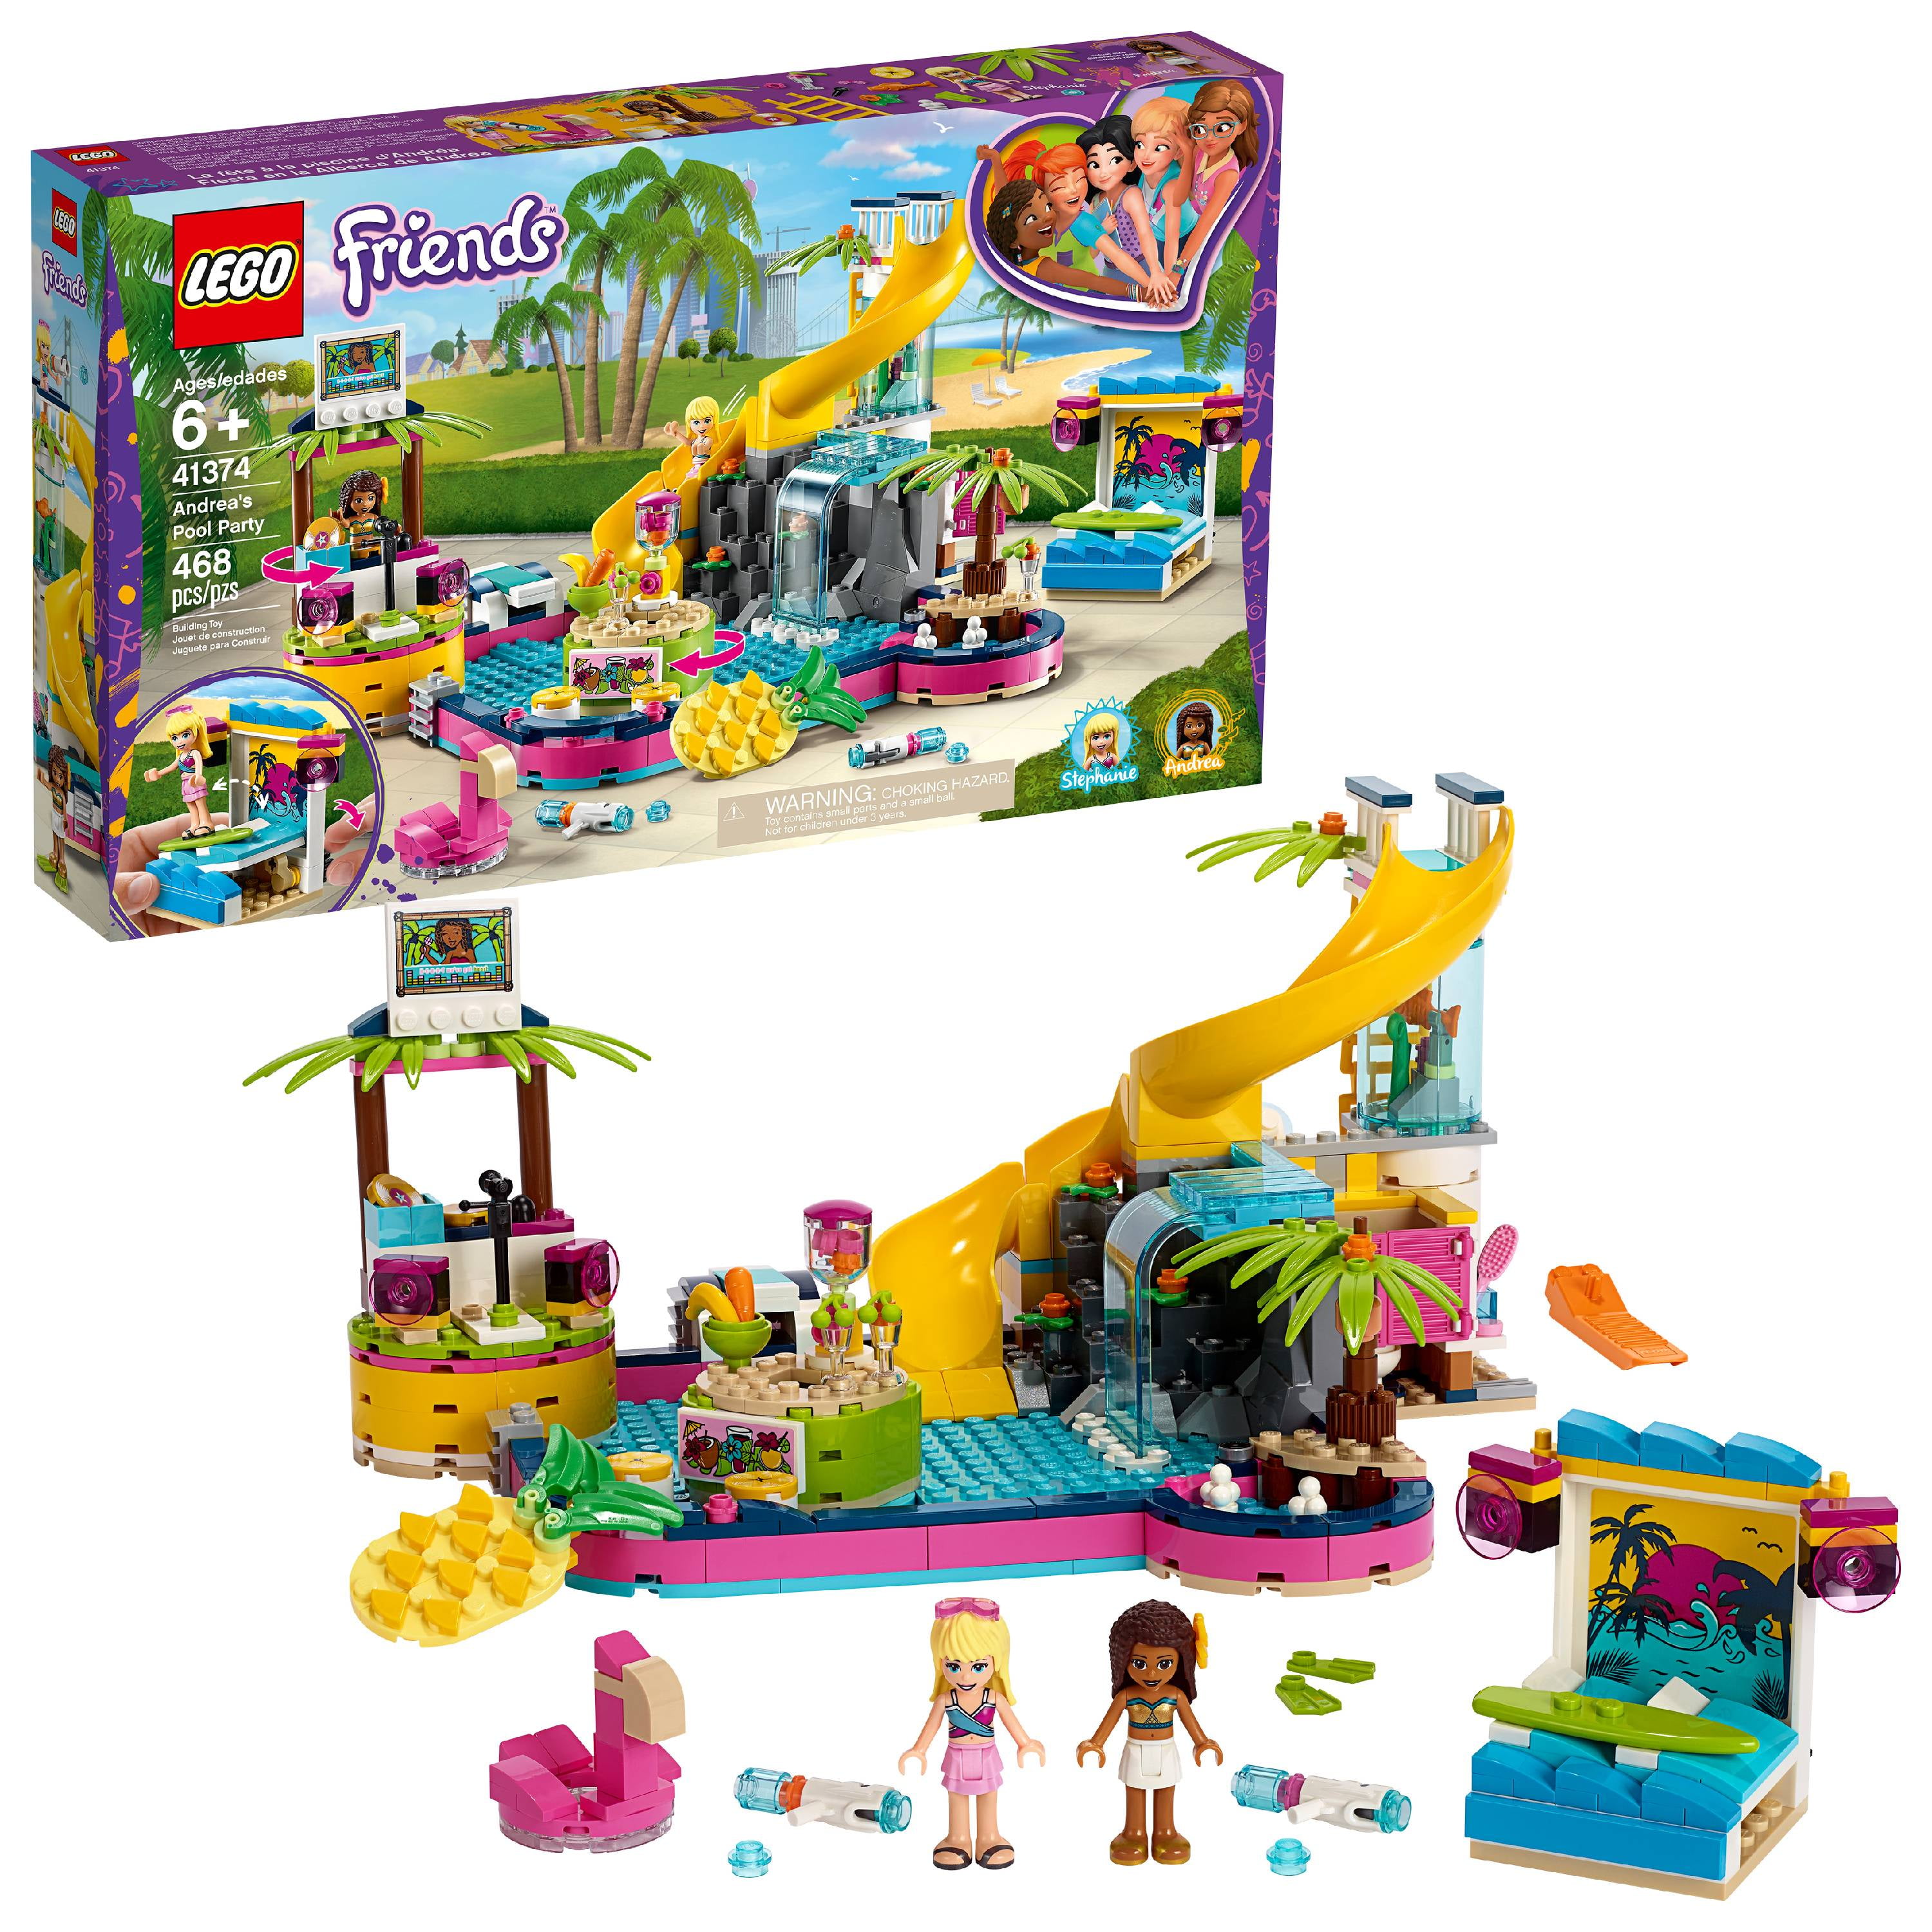 LEGO Friends Andreas Pool Party 41374 Building Set with Mini Dolls picture